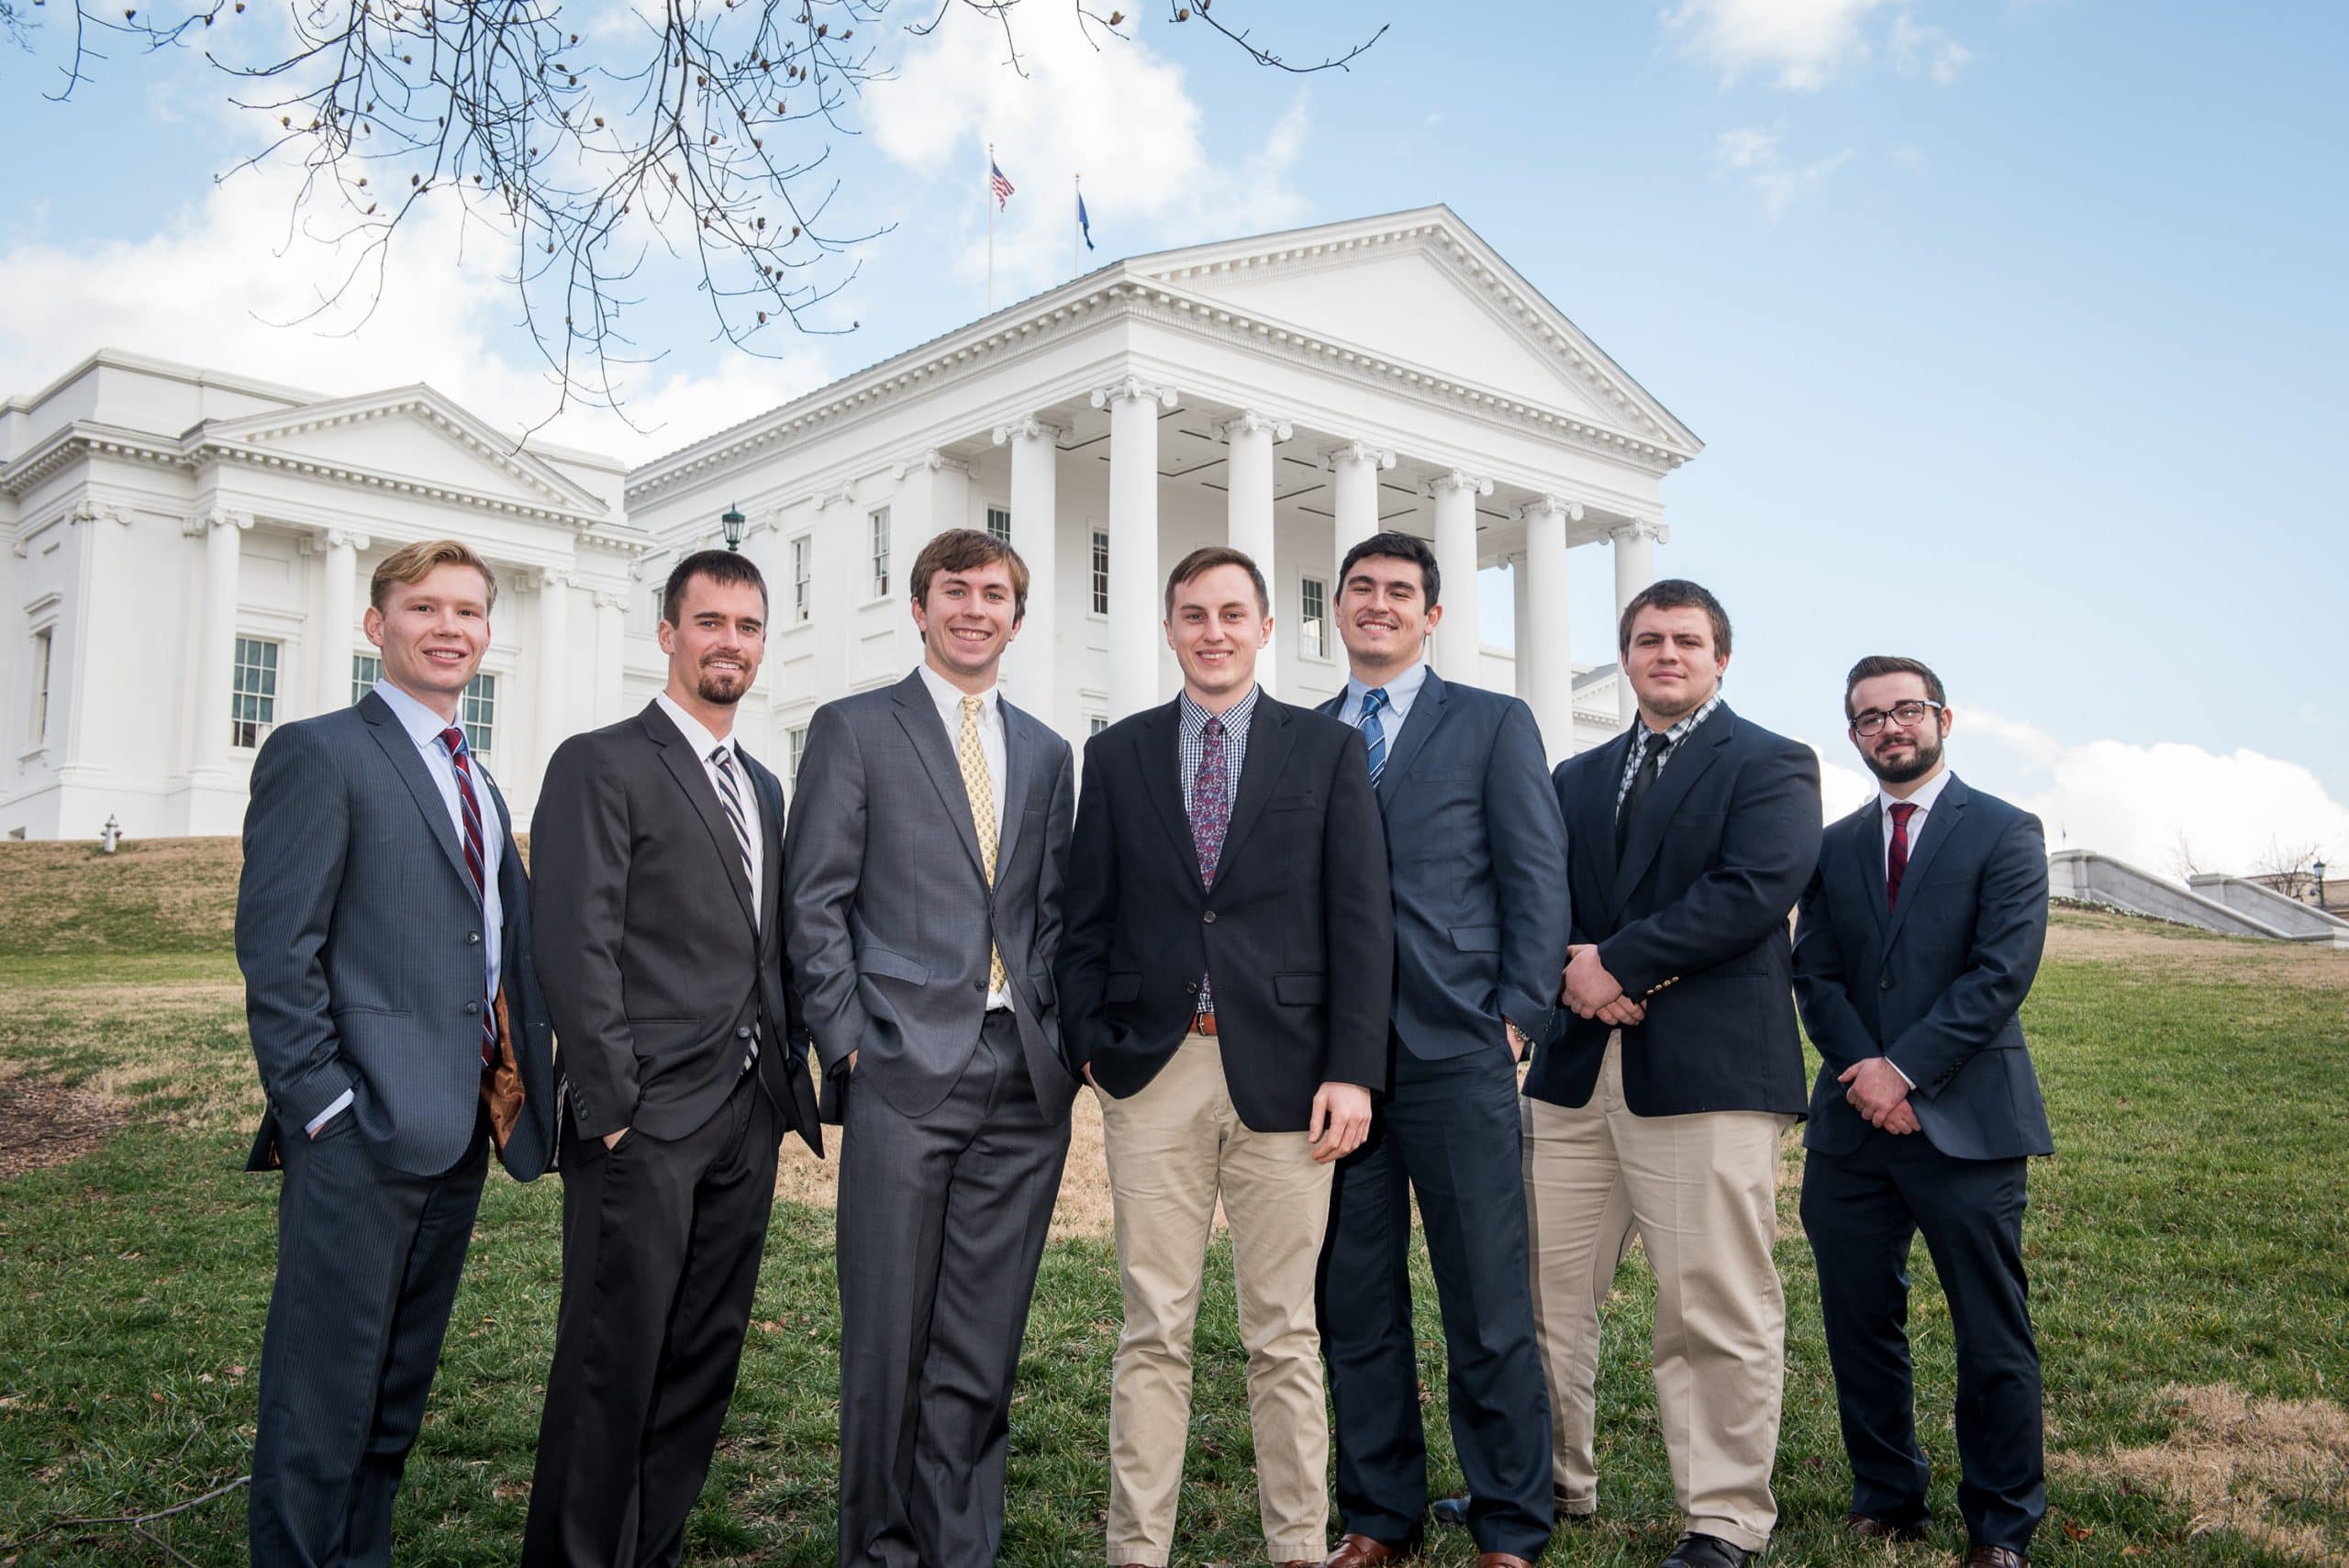 Interns pose in front of the Virginia state Capitol